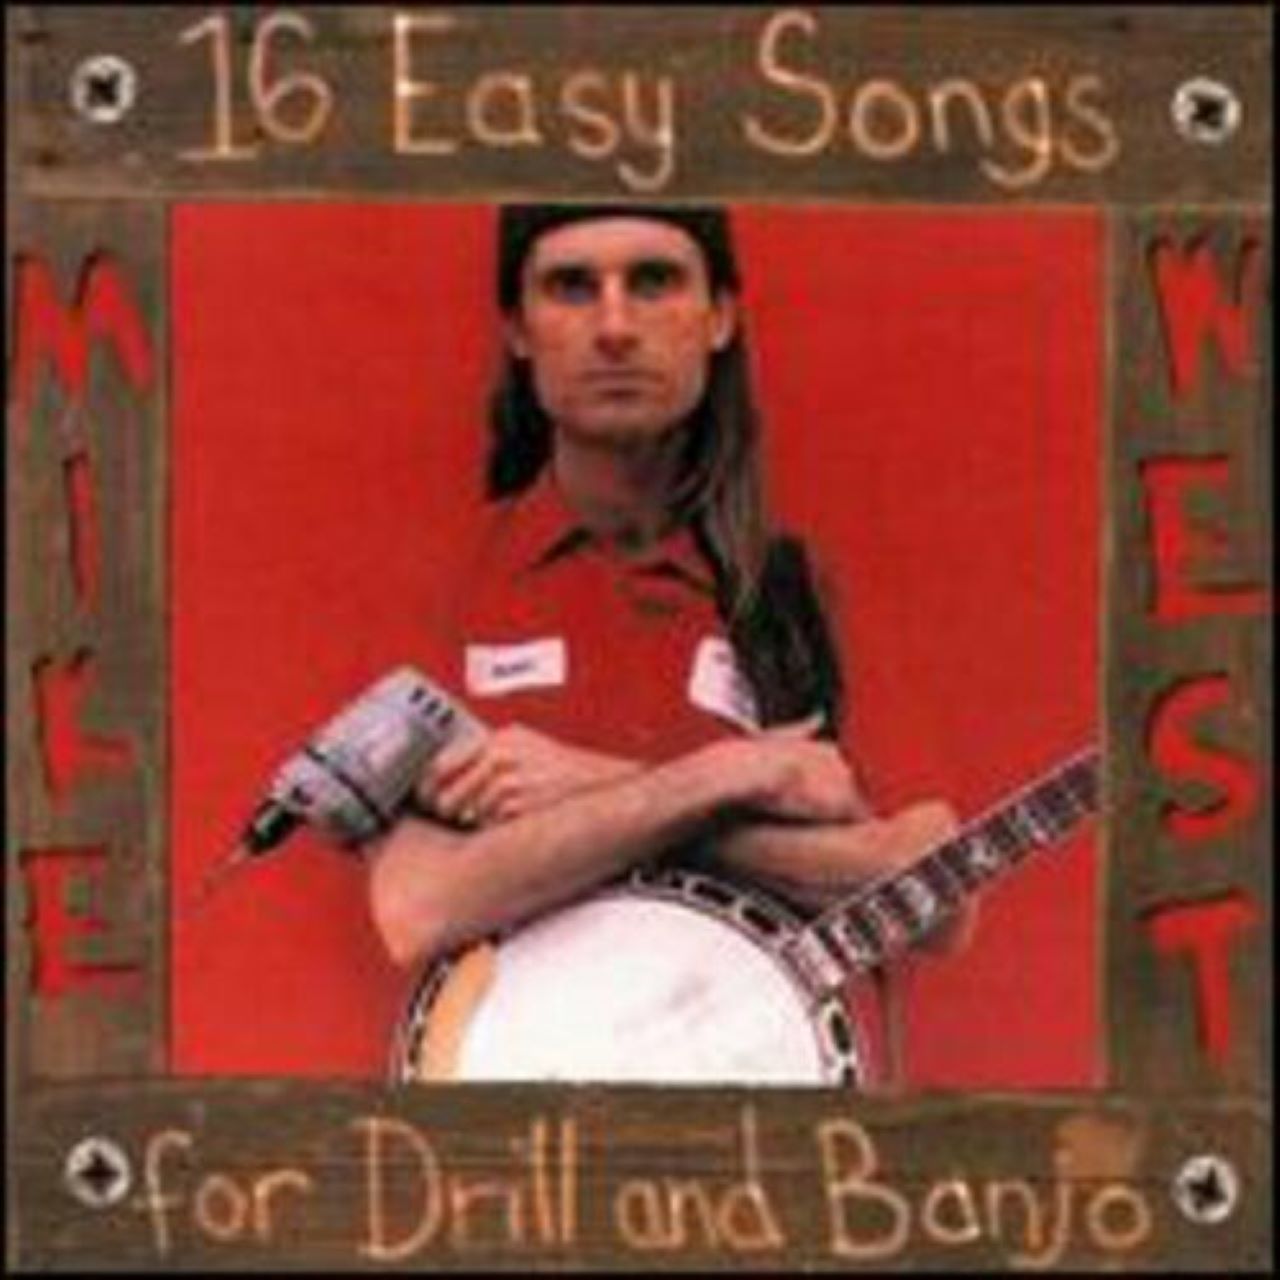 Mike West - 16 Easy Songs For Drill And Banjo cover album